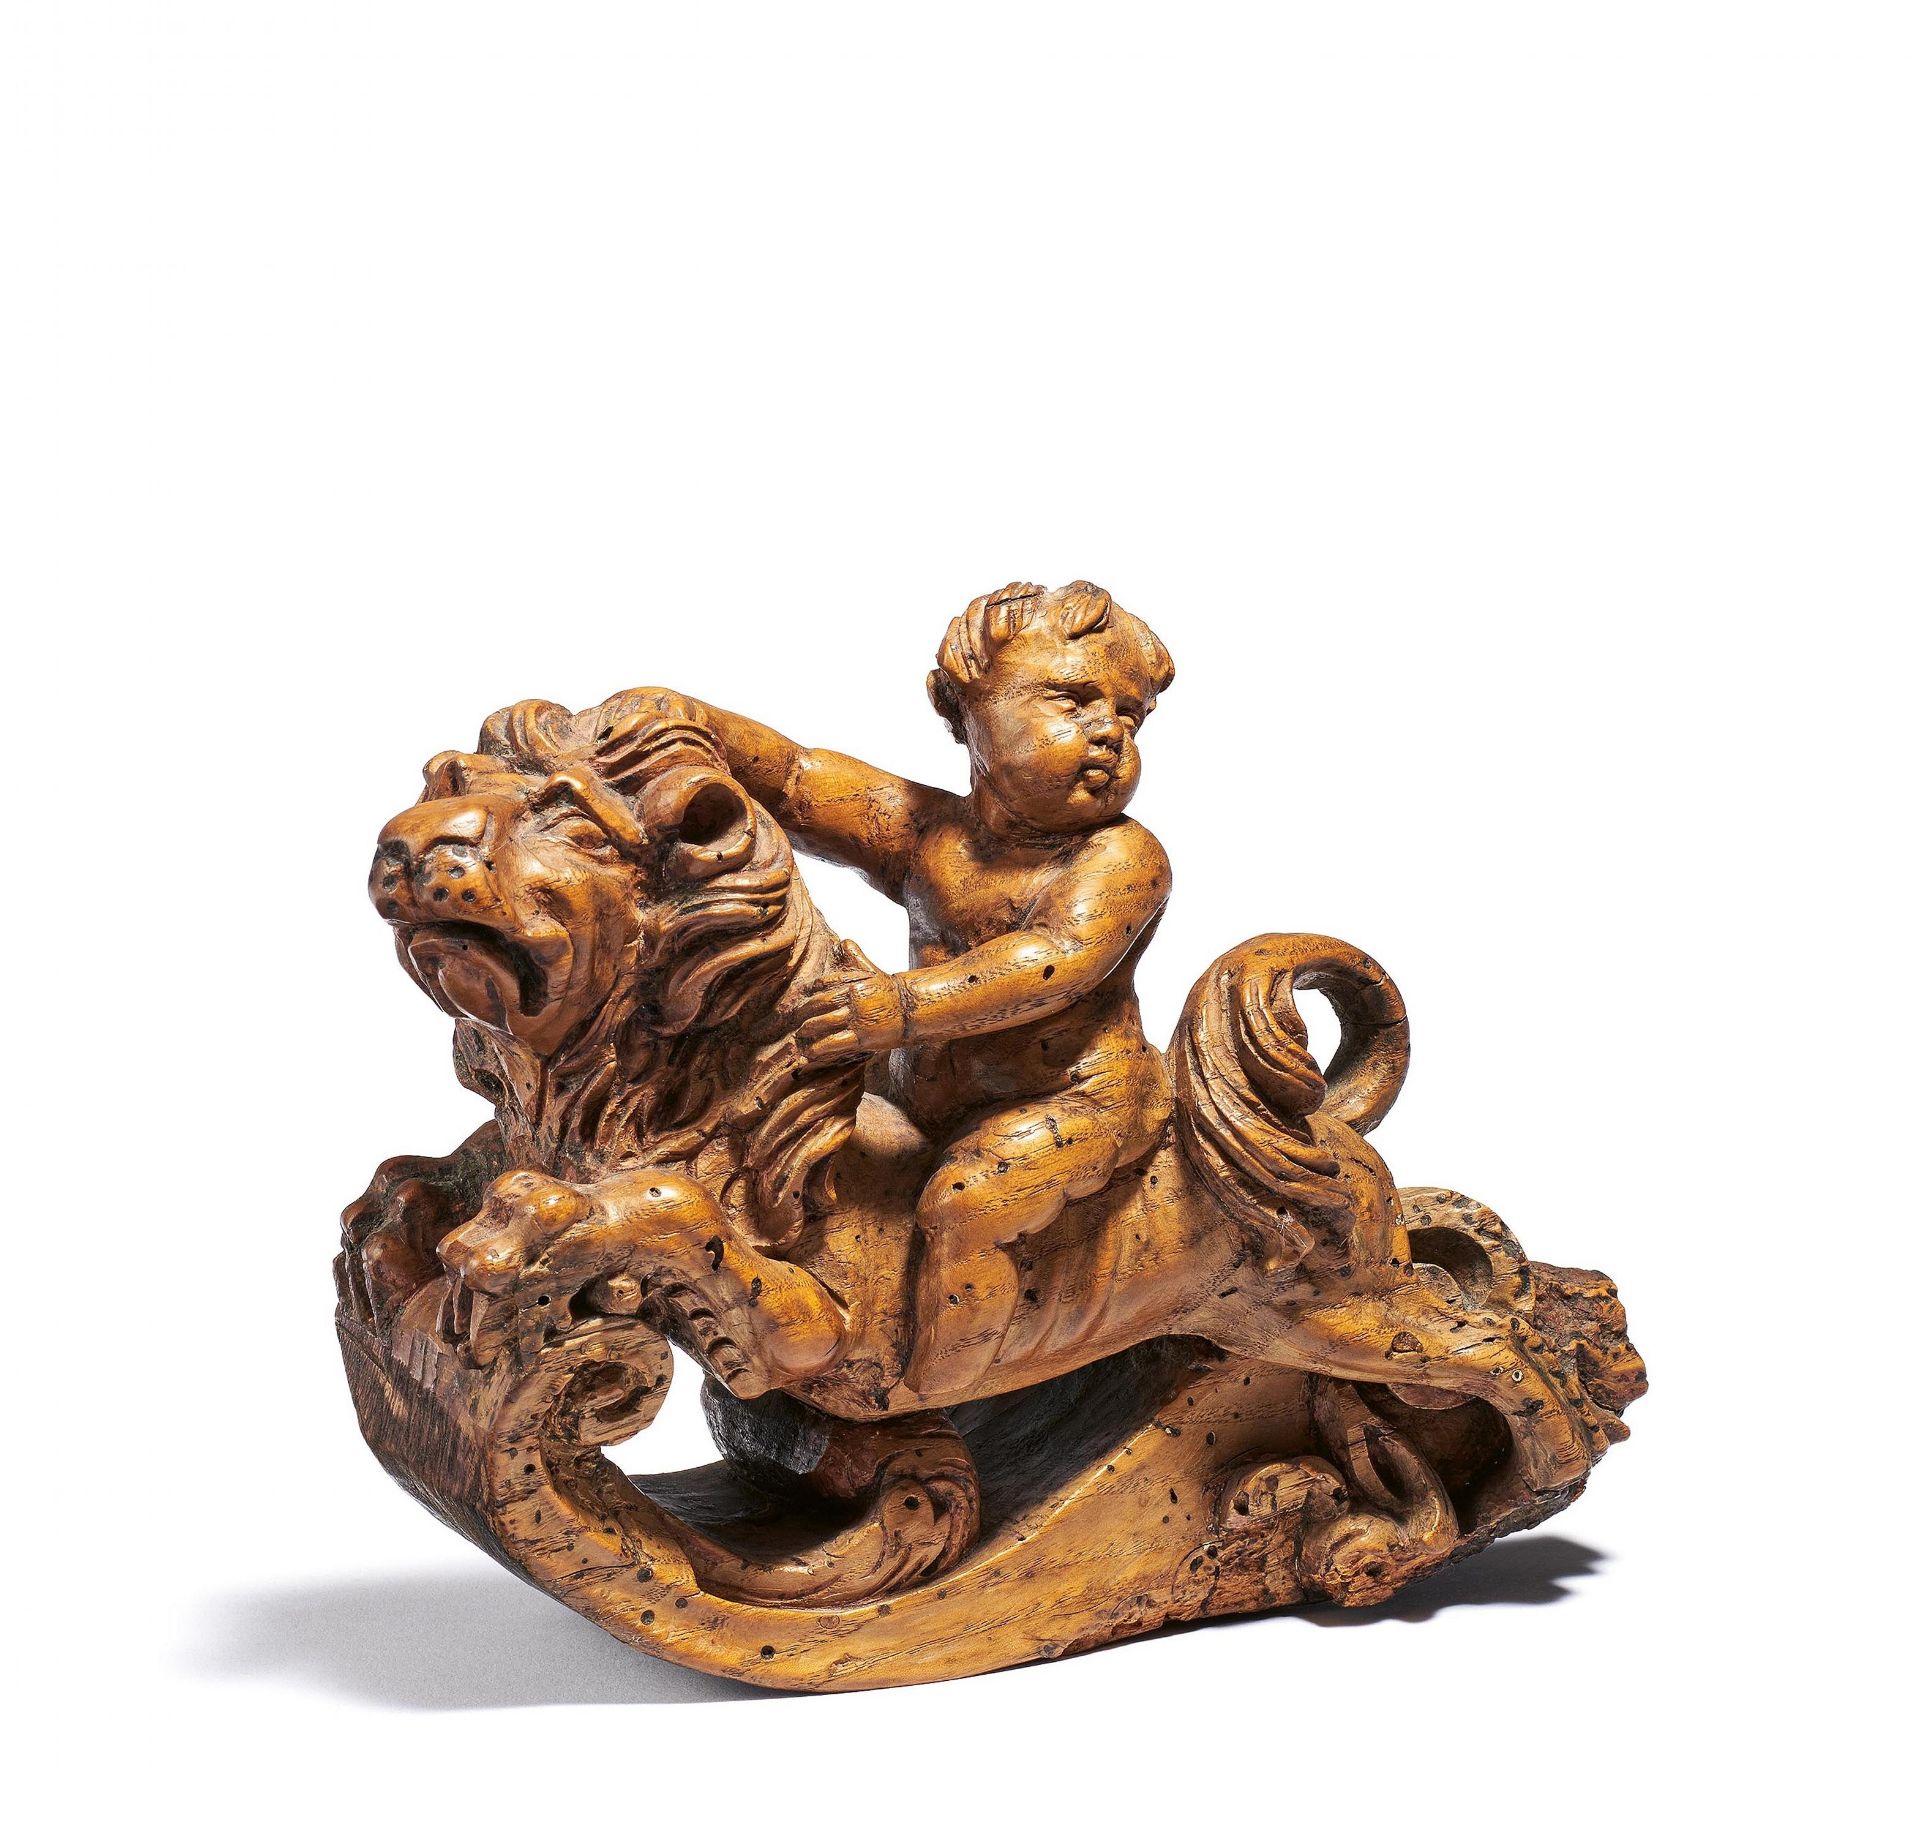 Small putto riding on lion